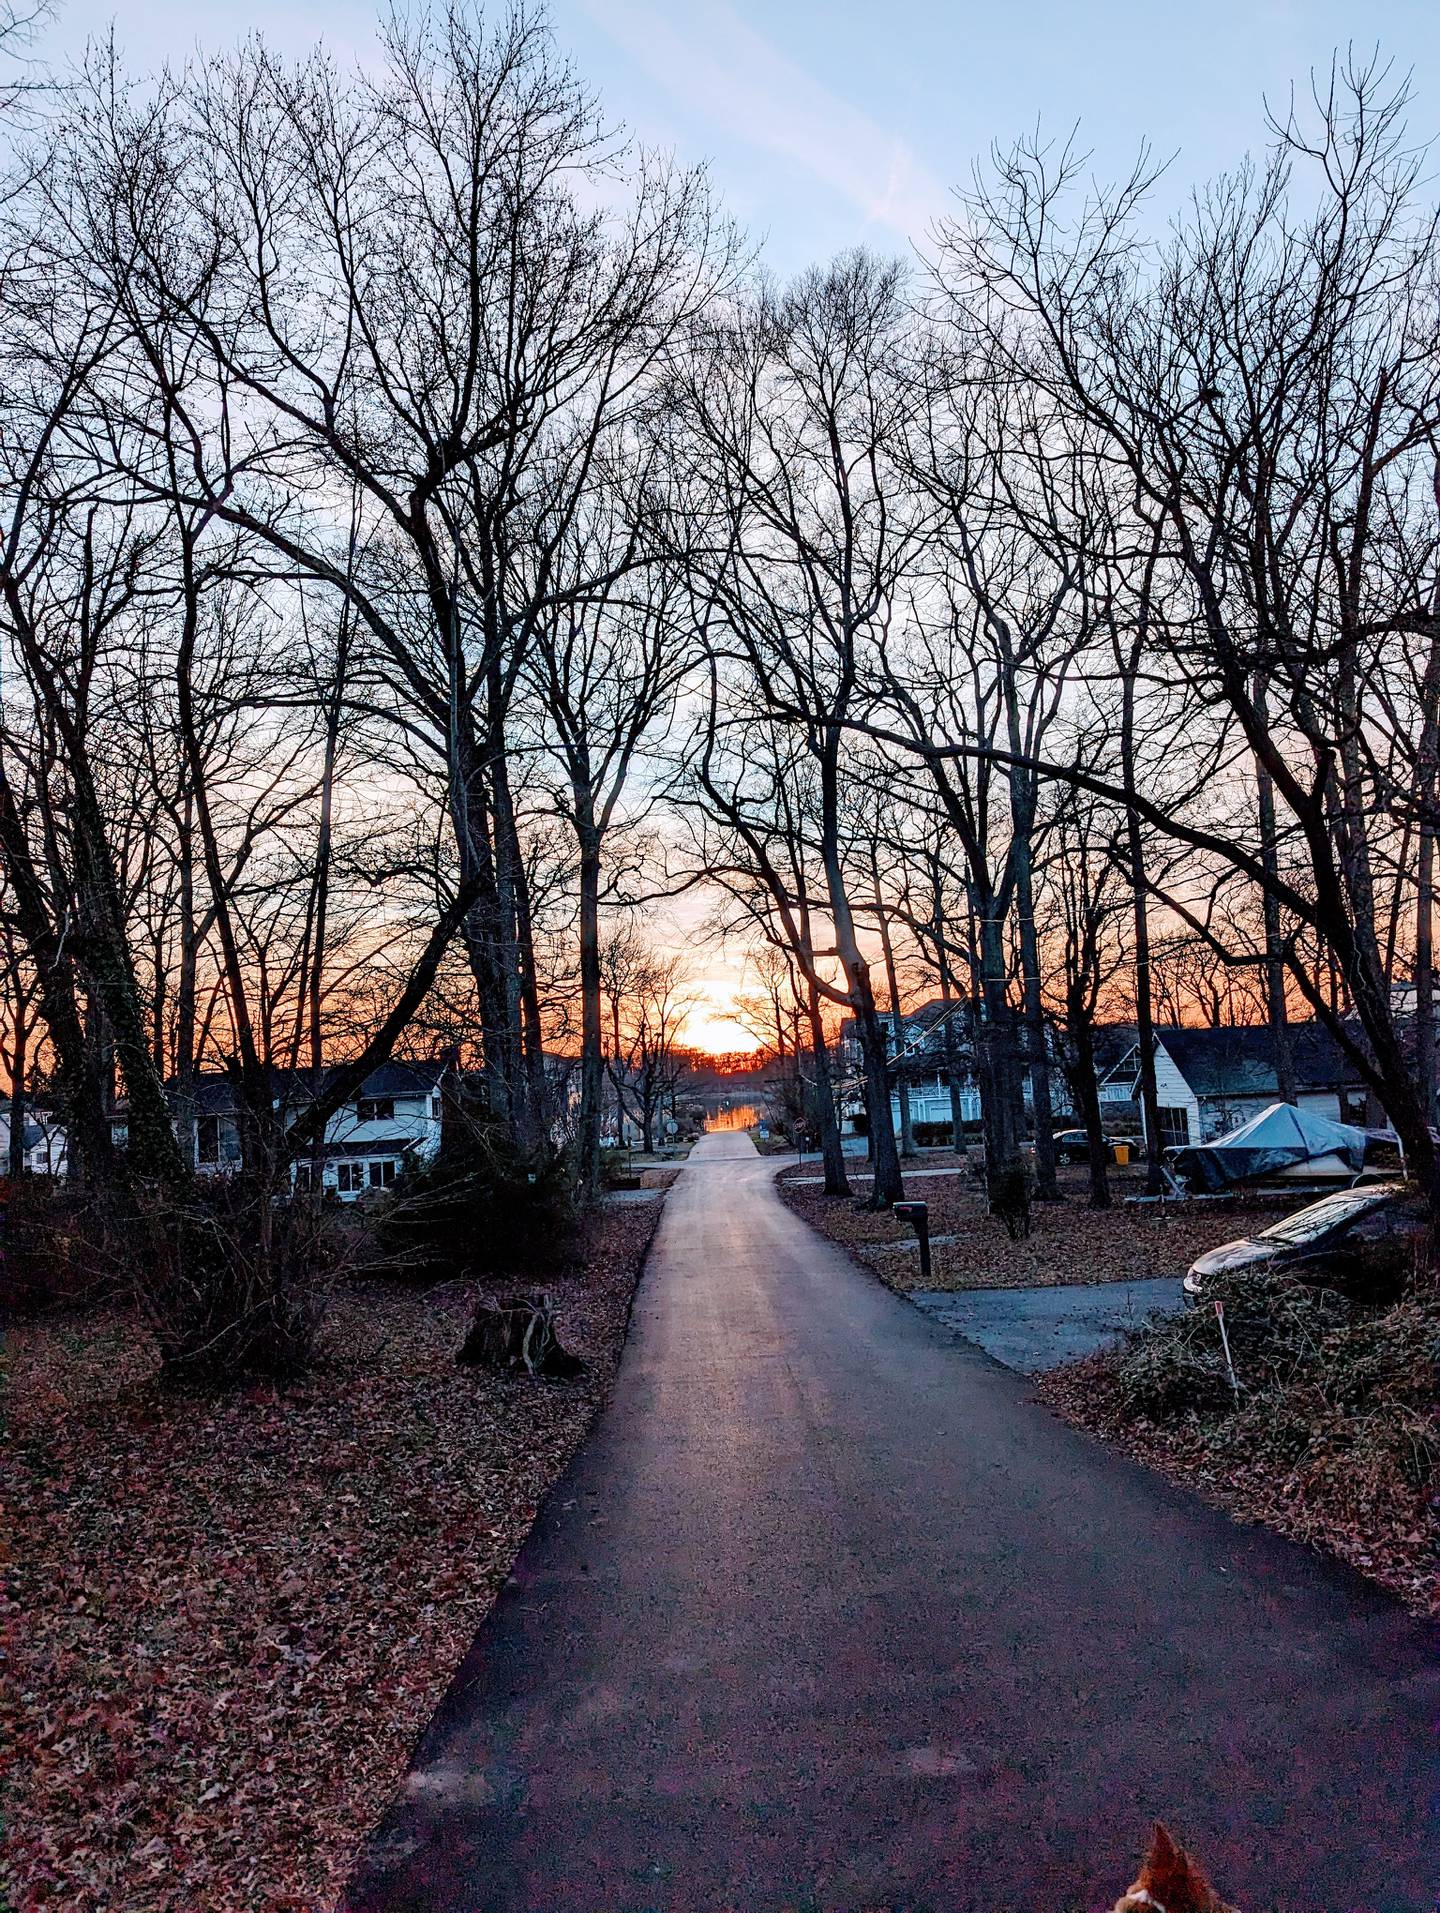 The sunset aligns with my street in February, a sign that spring is just around the corner.